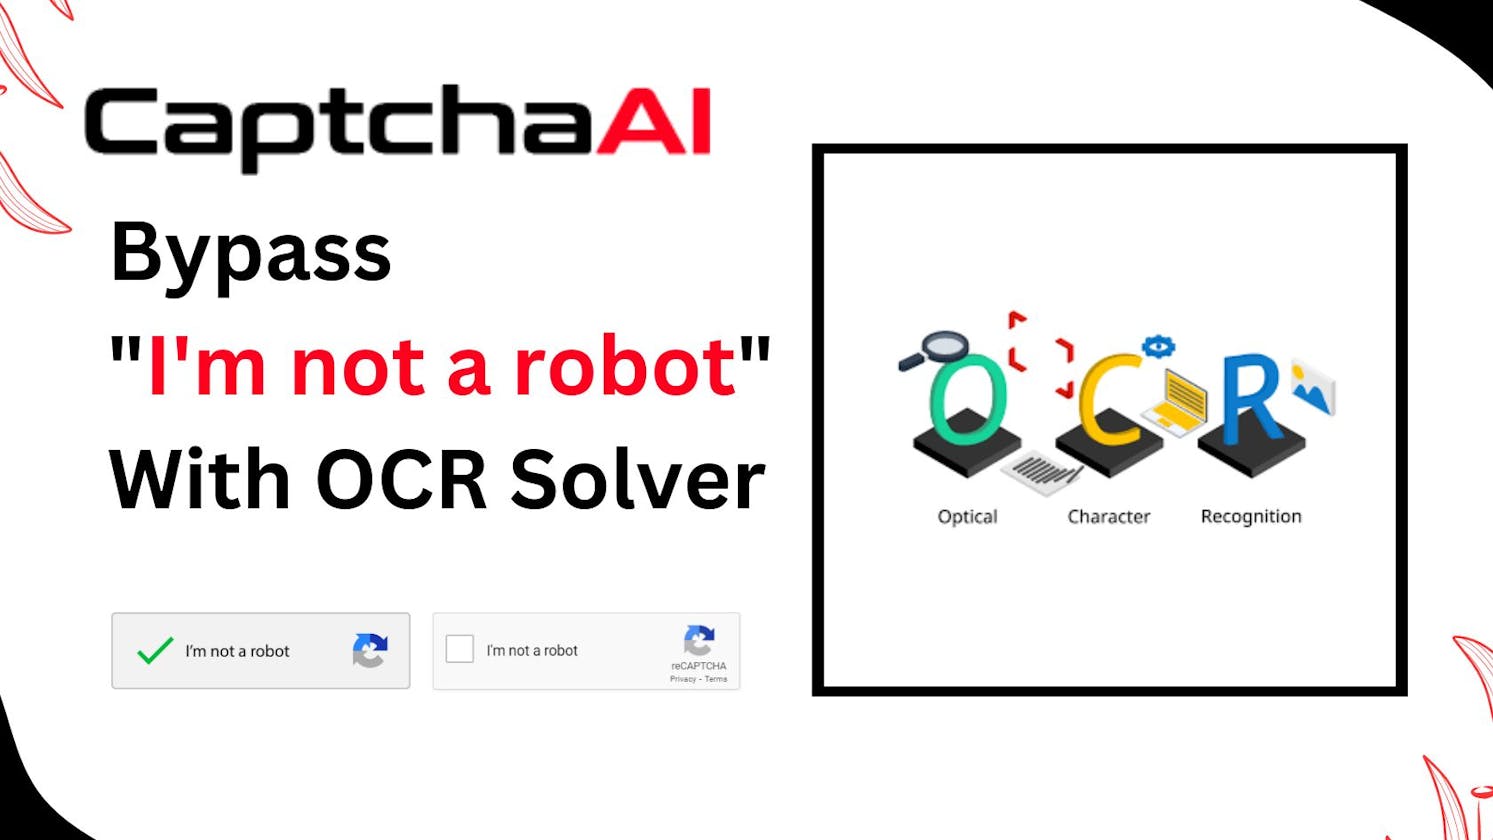 How to bypass "I'm not a robot" with OCR Solver?